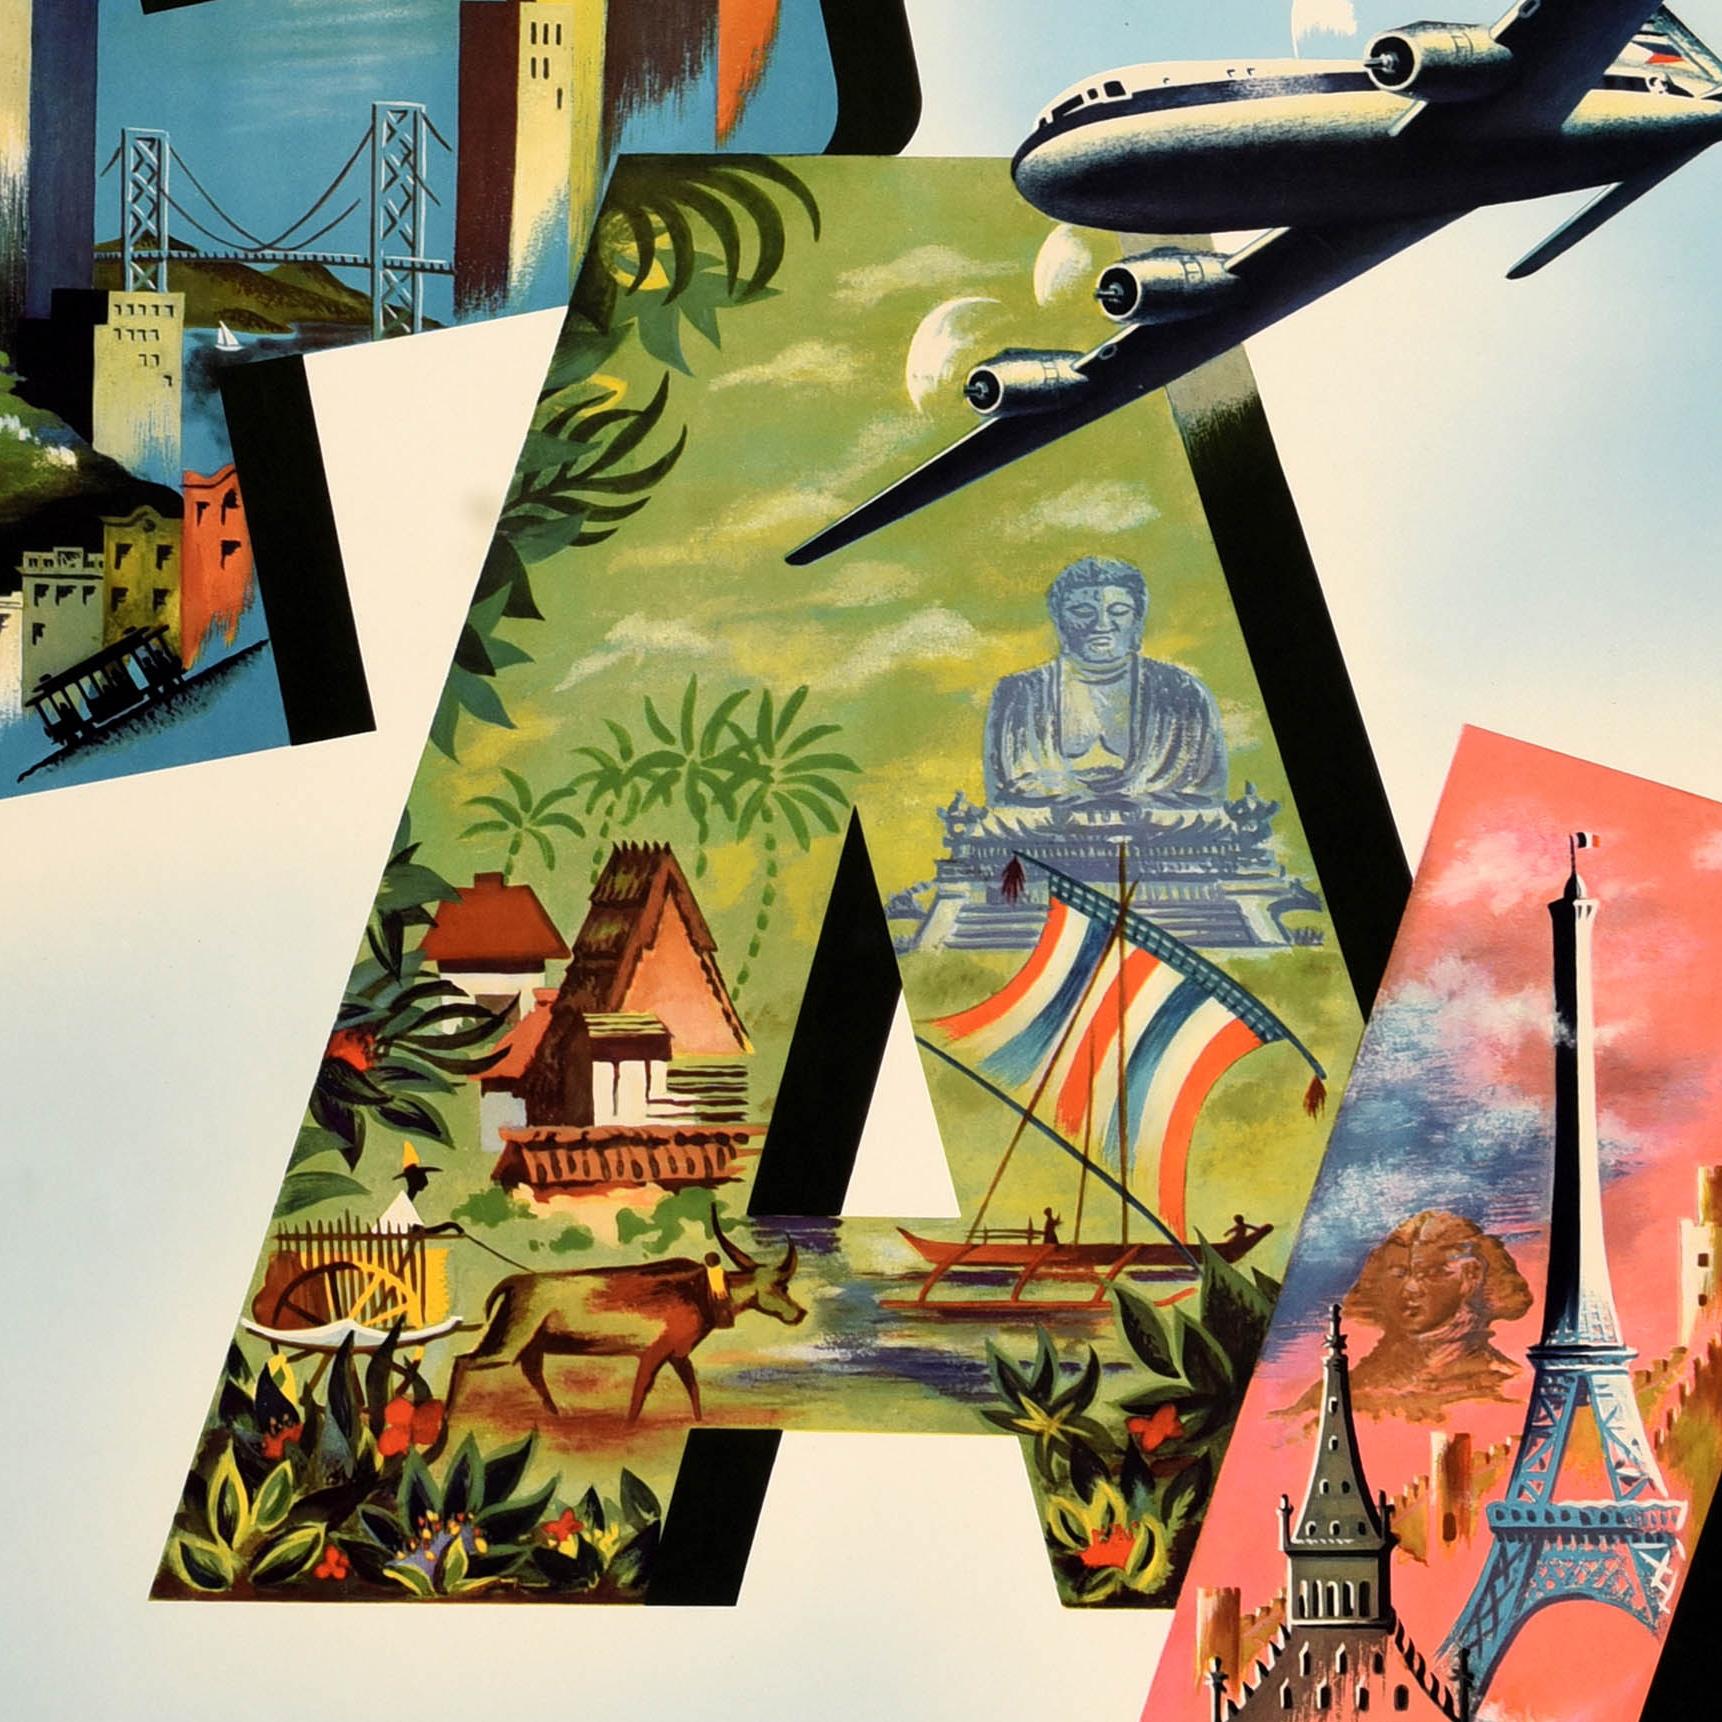 philippine airlines poster